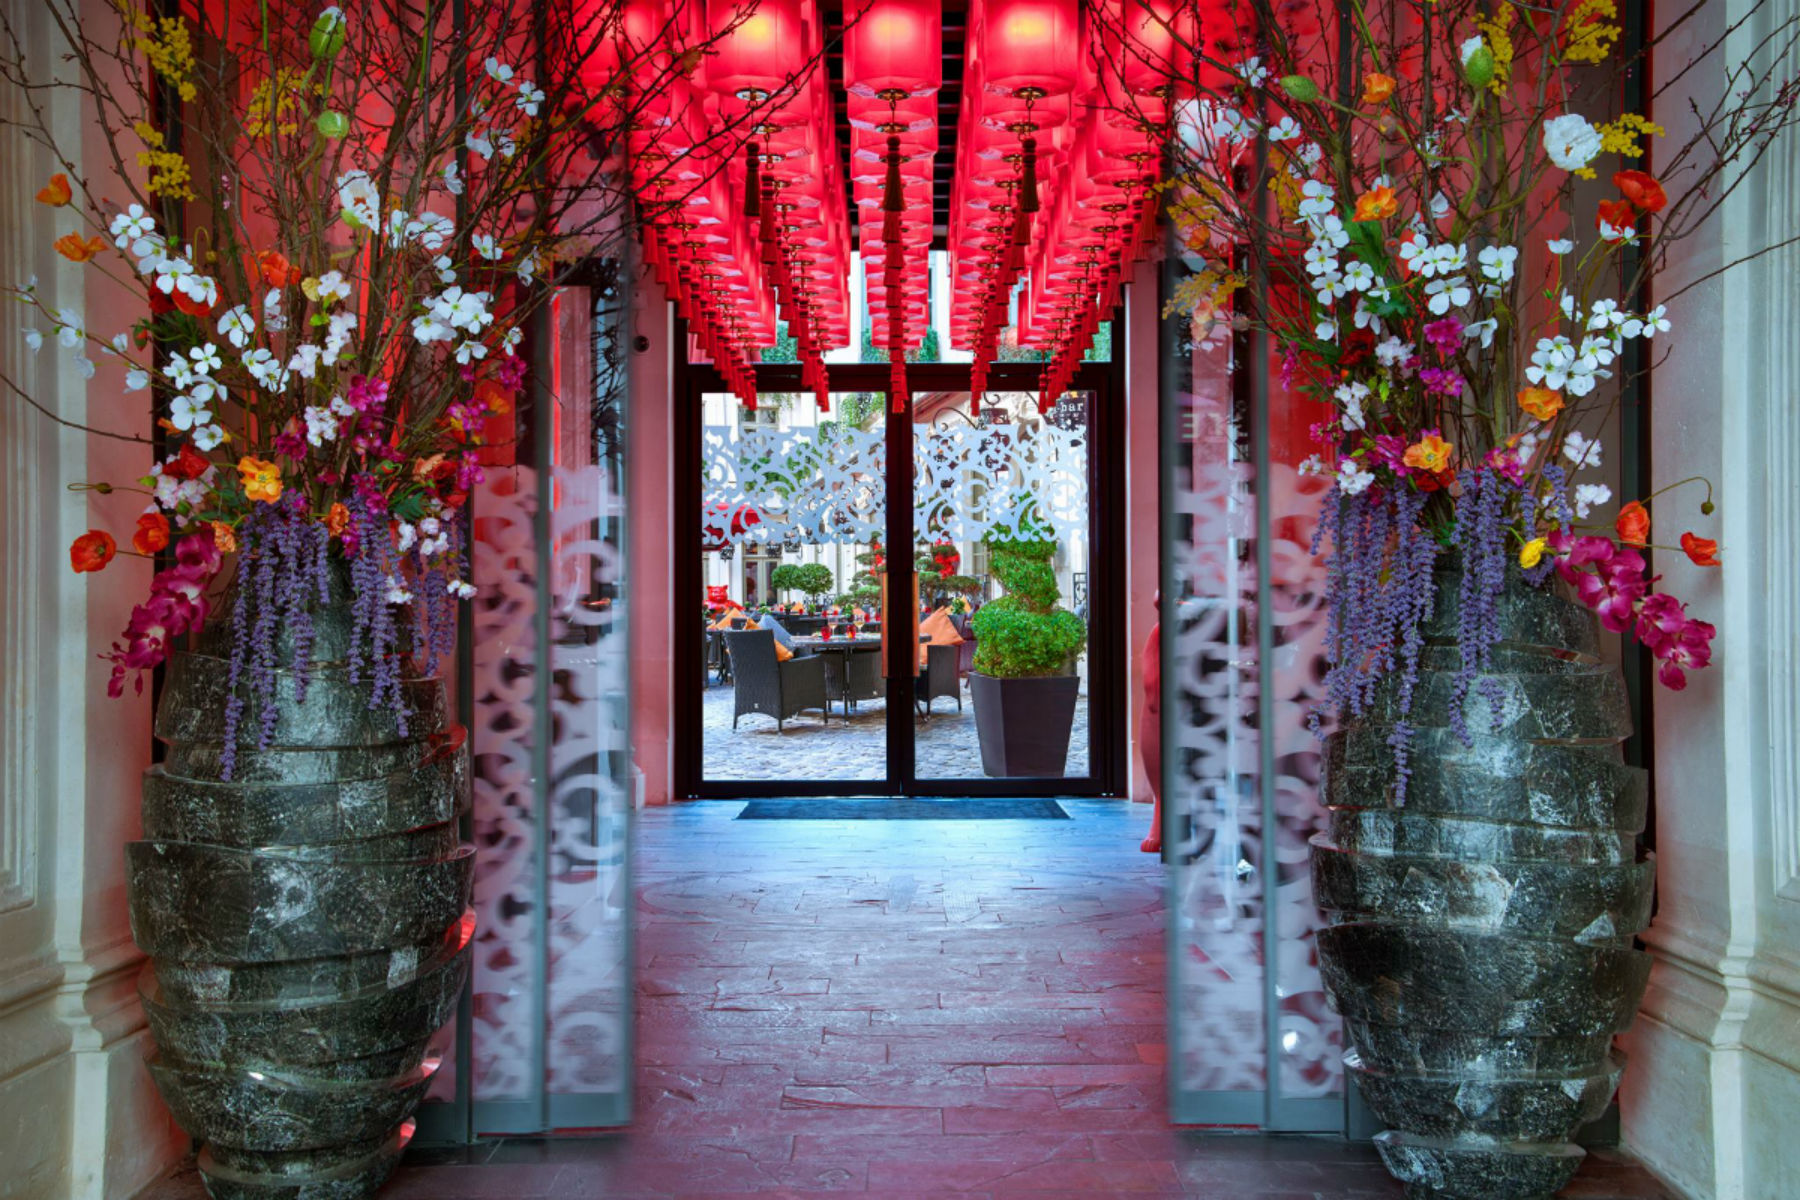 Home away from home: 4 European hotels inspired by Asia